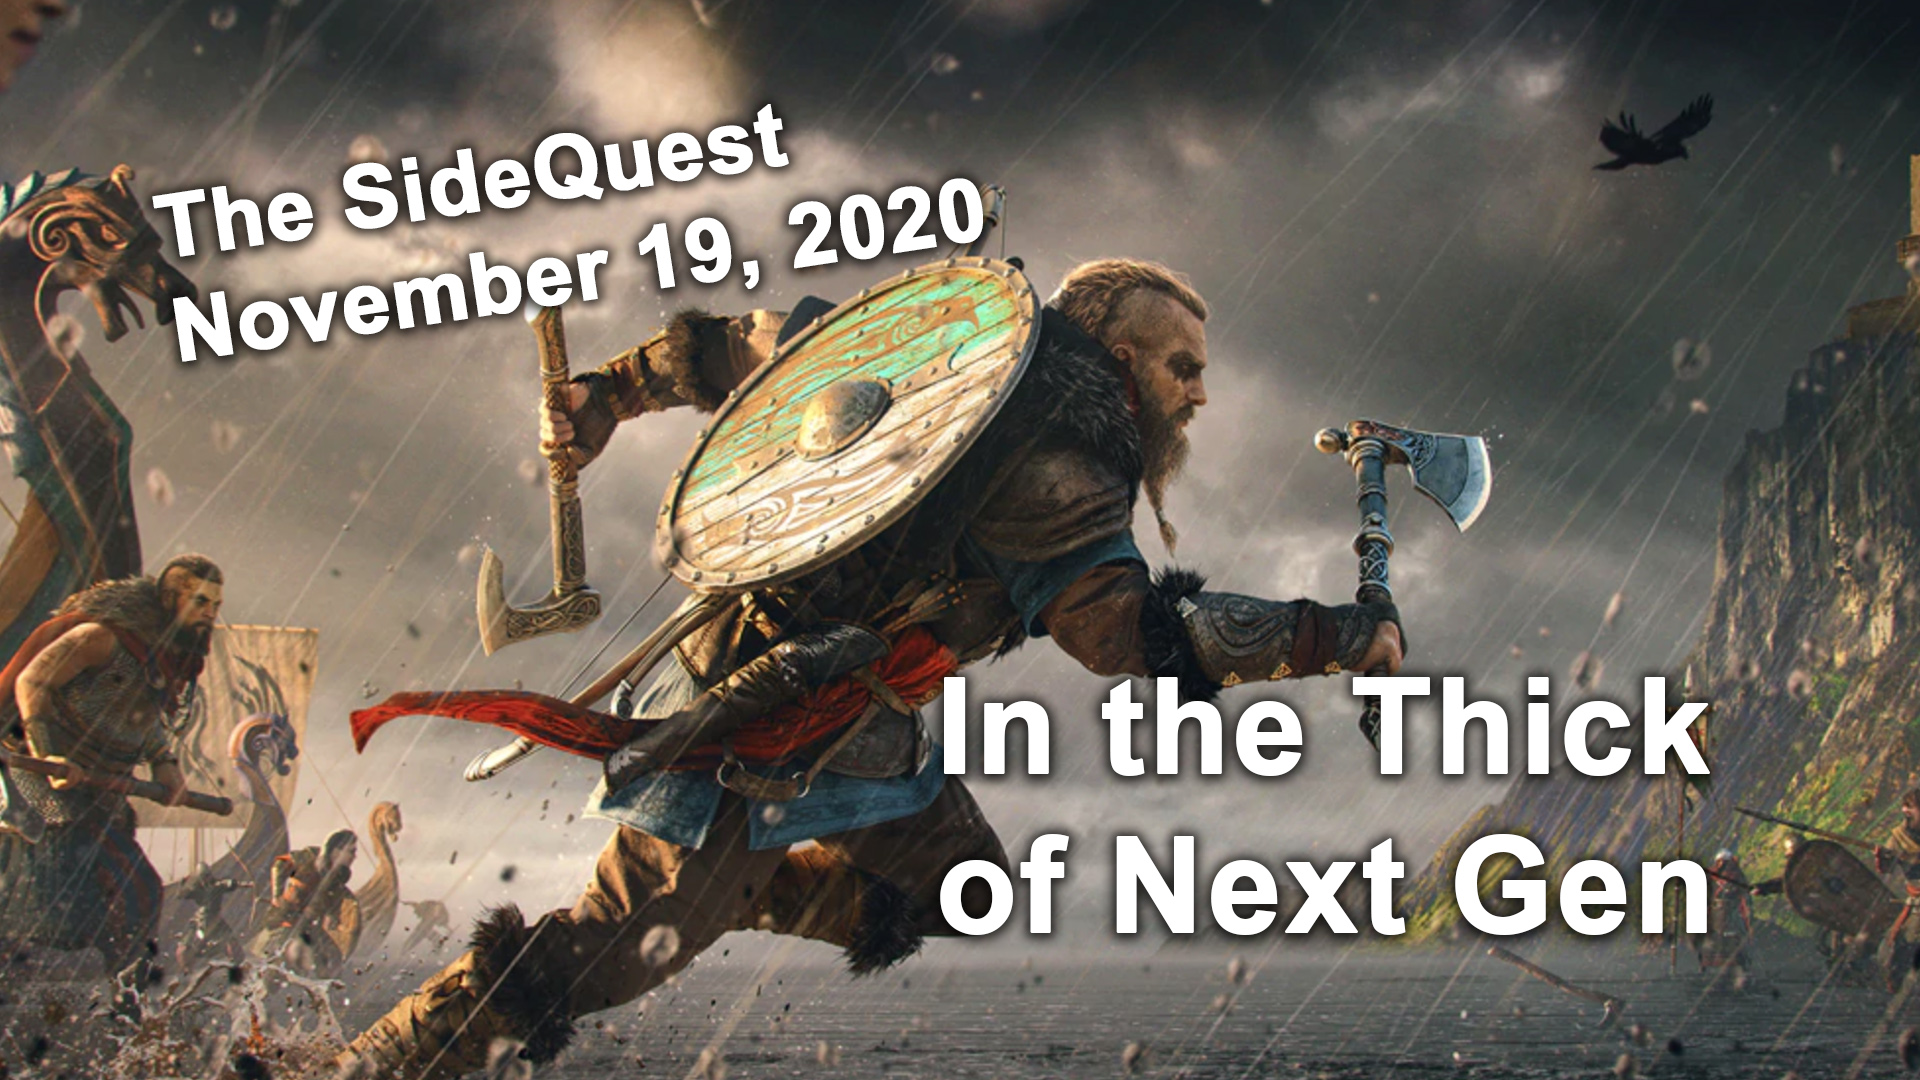 The SideQuest November 19, 2020: In the Thick of Next Gen